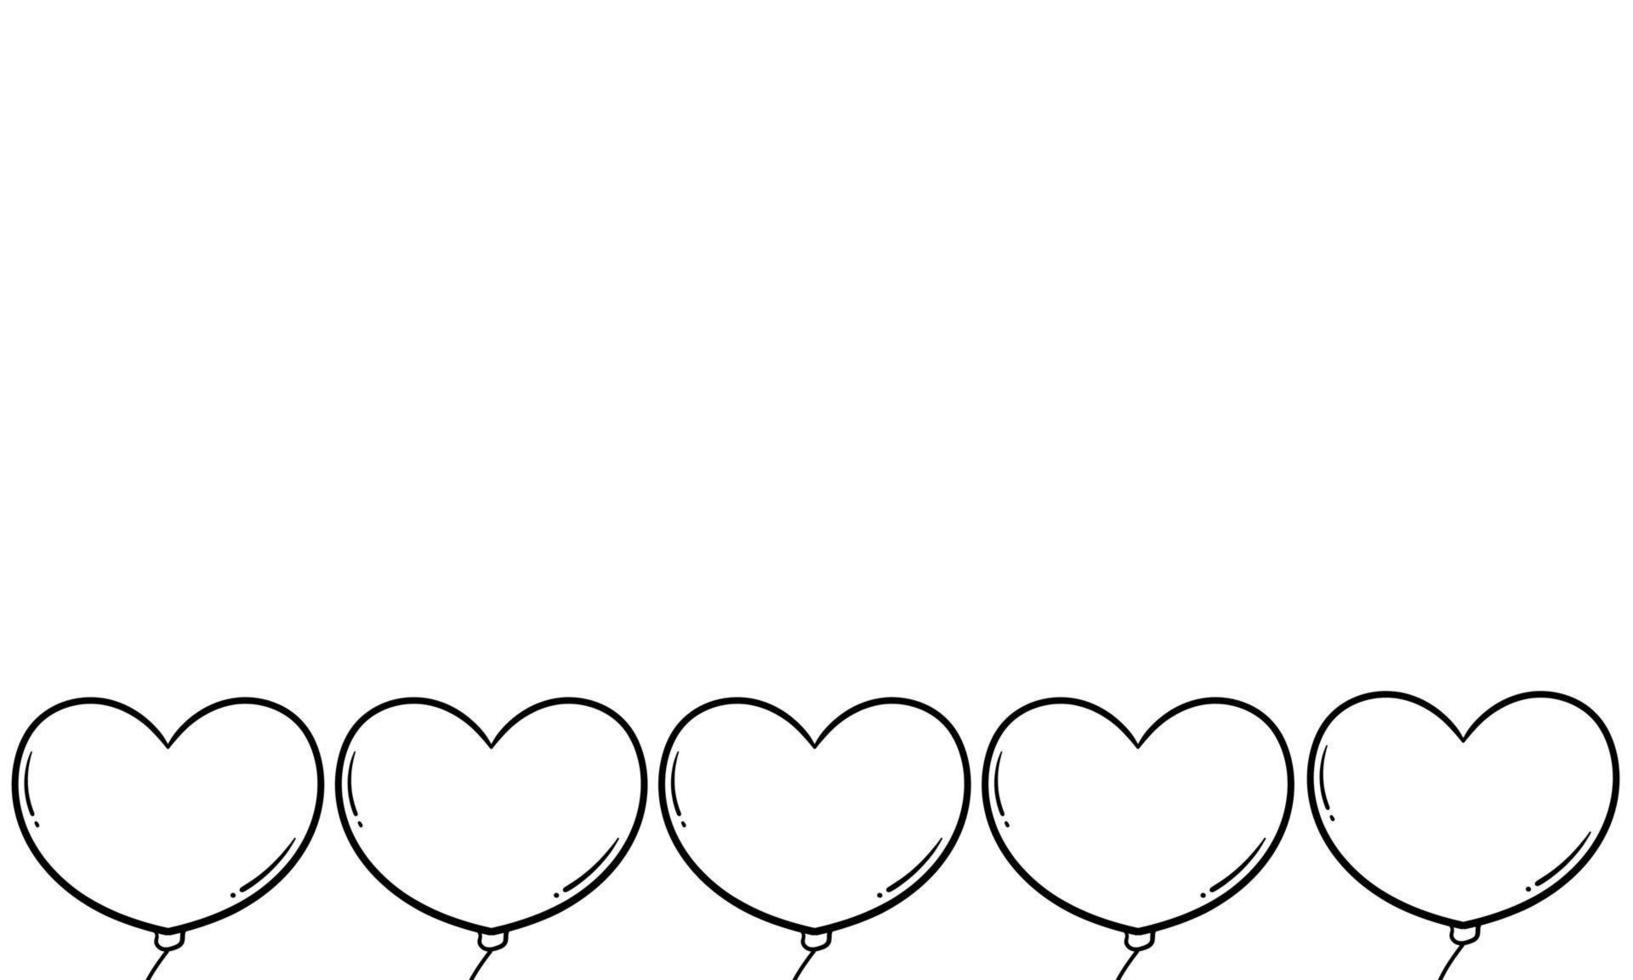 heart shaped balloon hand drawn background vector